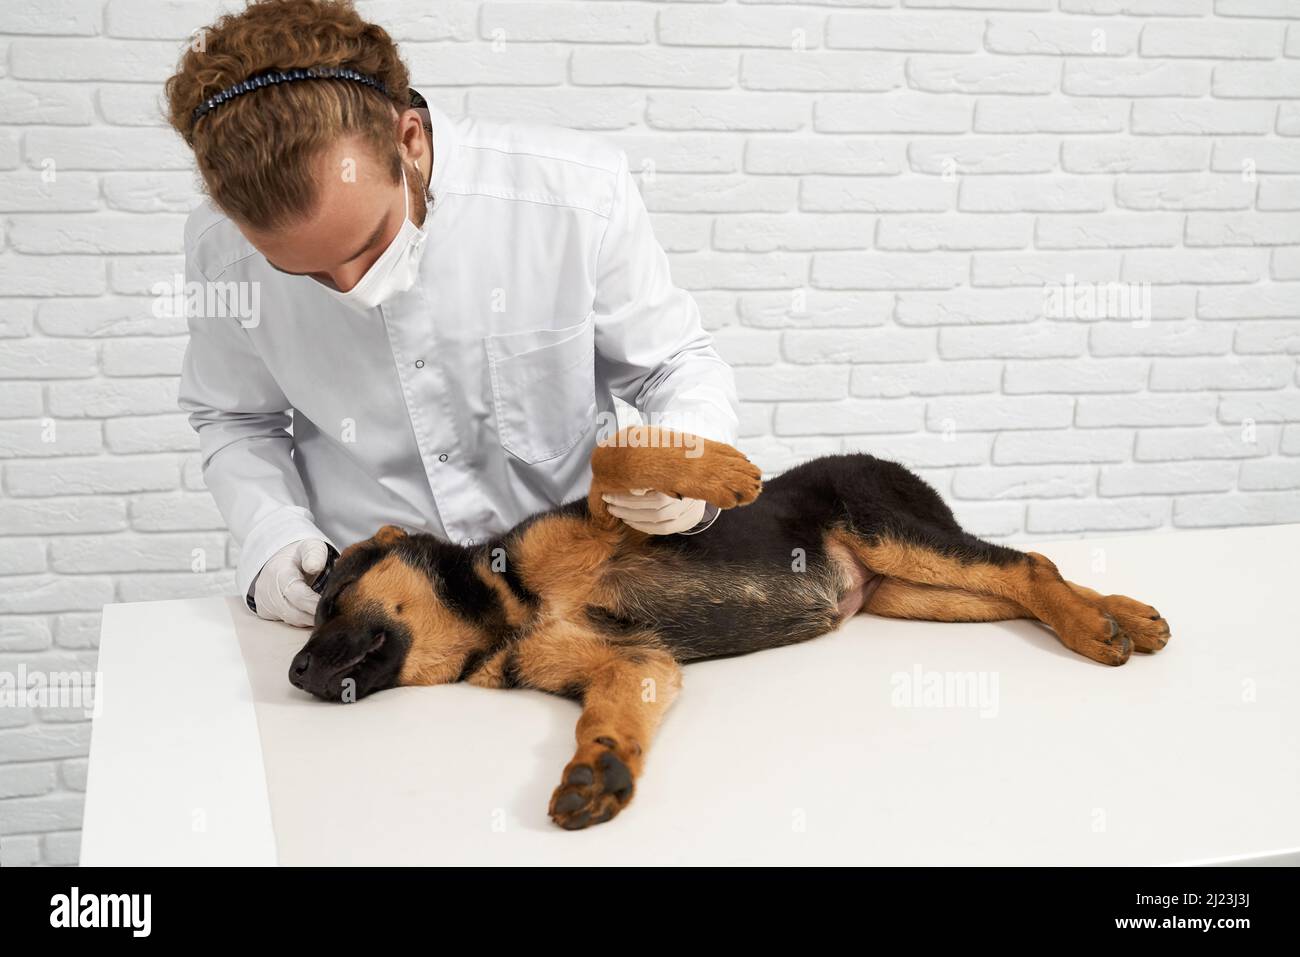 Front view of vet treating German Shepherd in vet clinic. Doctor in white lab coat holding dog paw, examining patient, dog lying on side with closed eyes. Concept of pets. Stock Photo